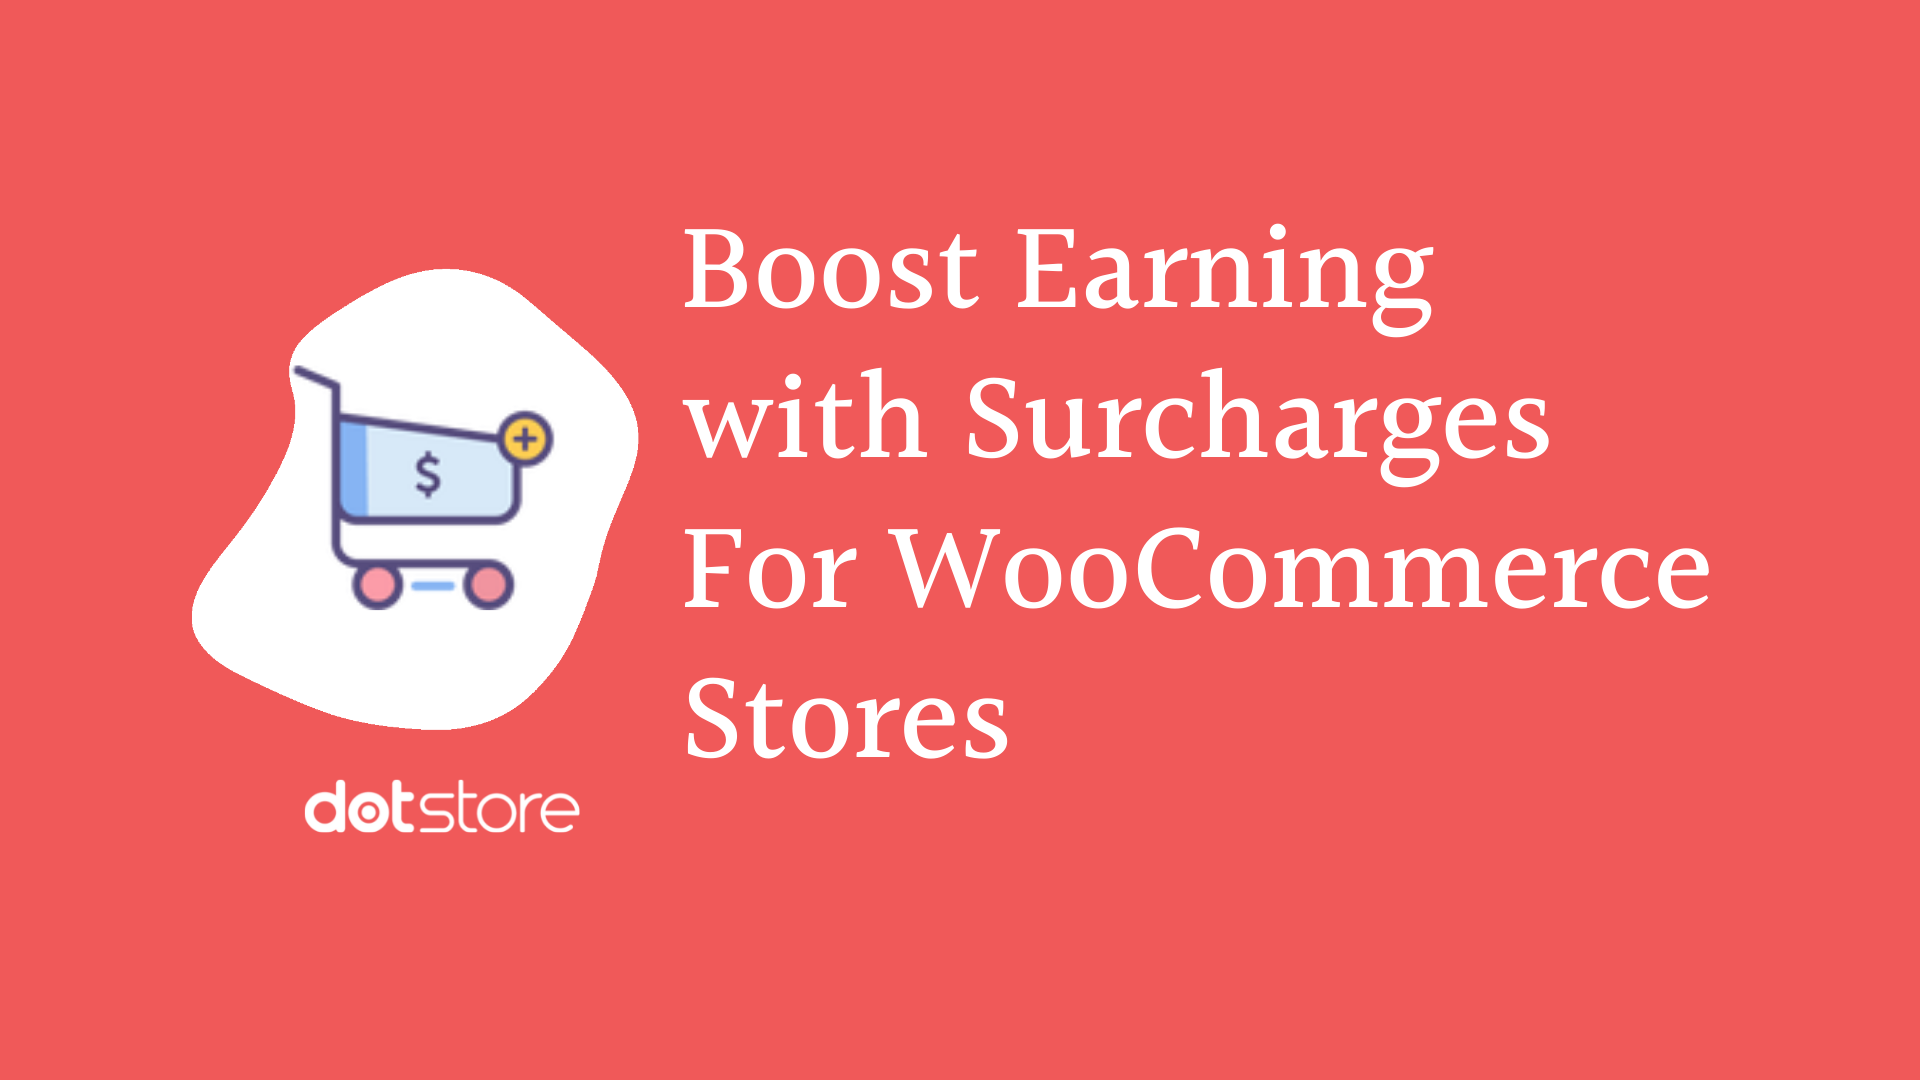 How to Make Your Customers Pay Service Surcharges for Online Shopping in WooCommerc?